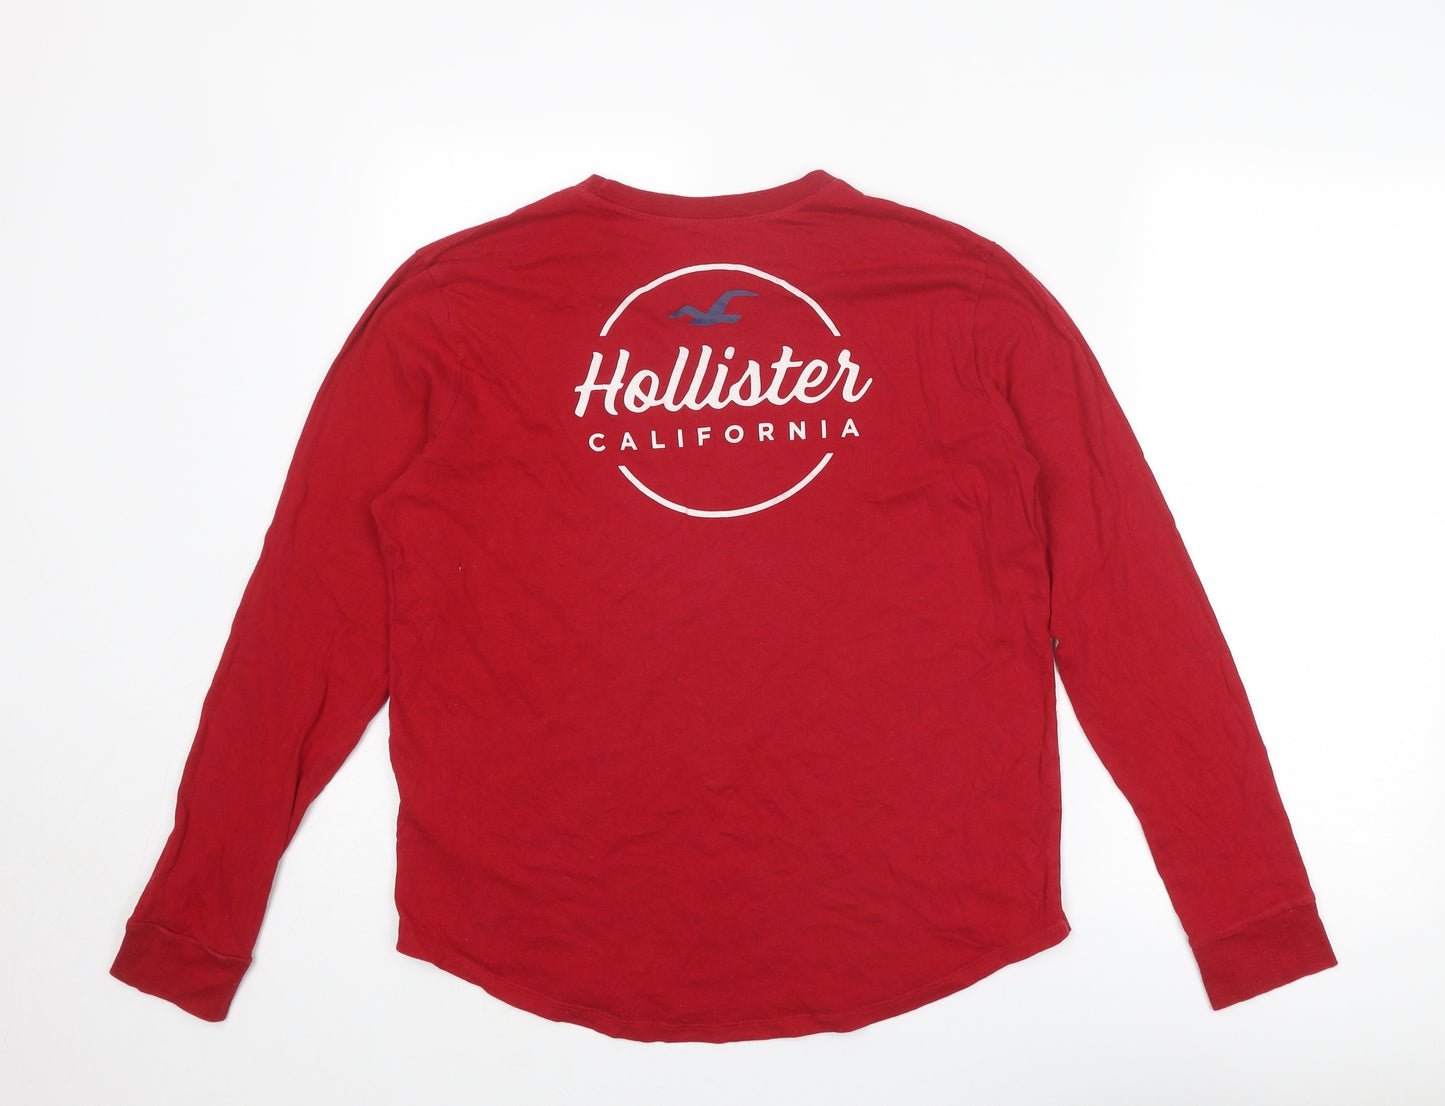 Hollister Mens Red Cotton T-Shirt Size S Round Neck